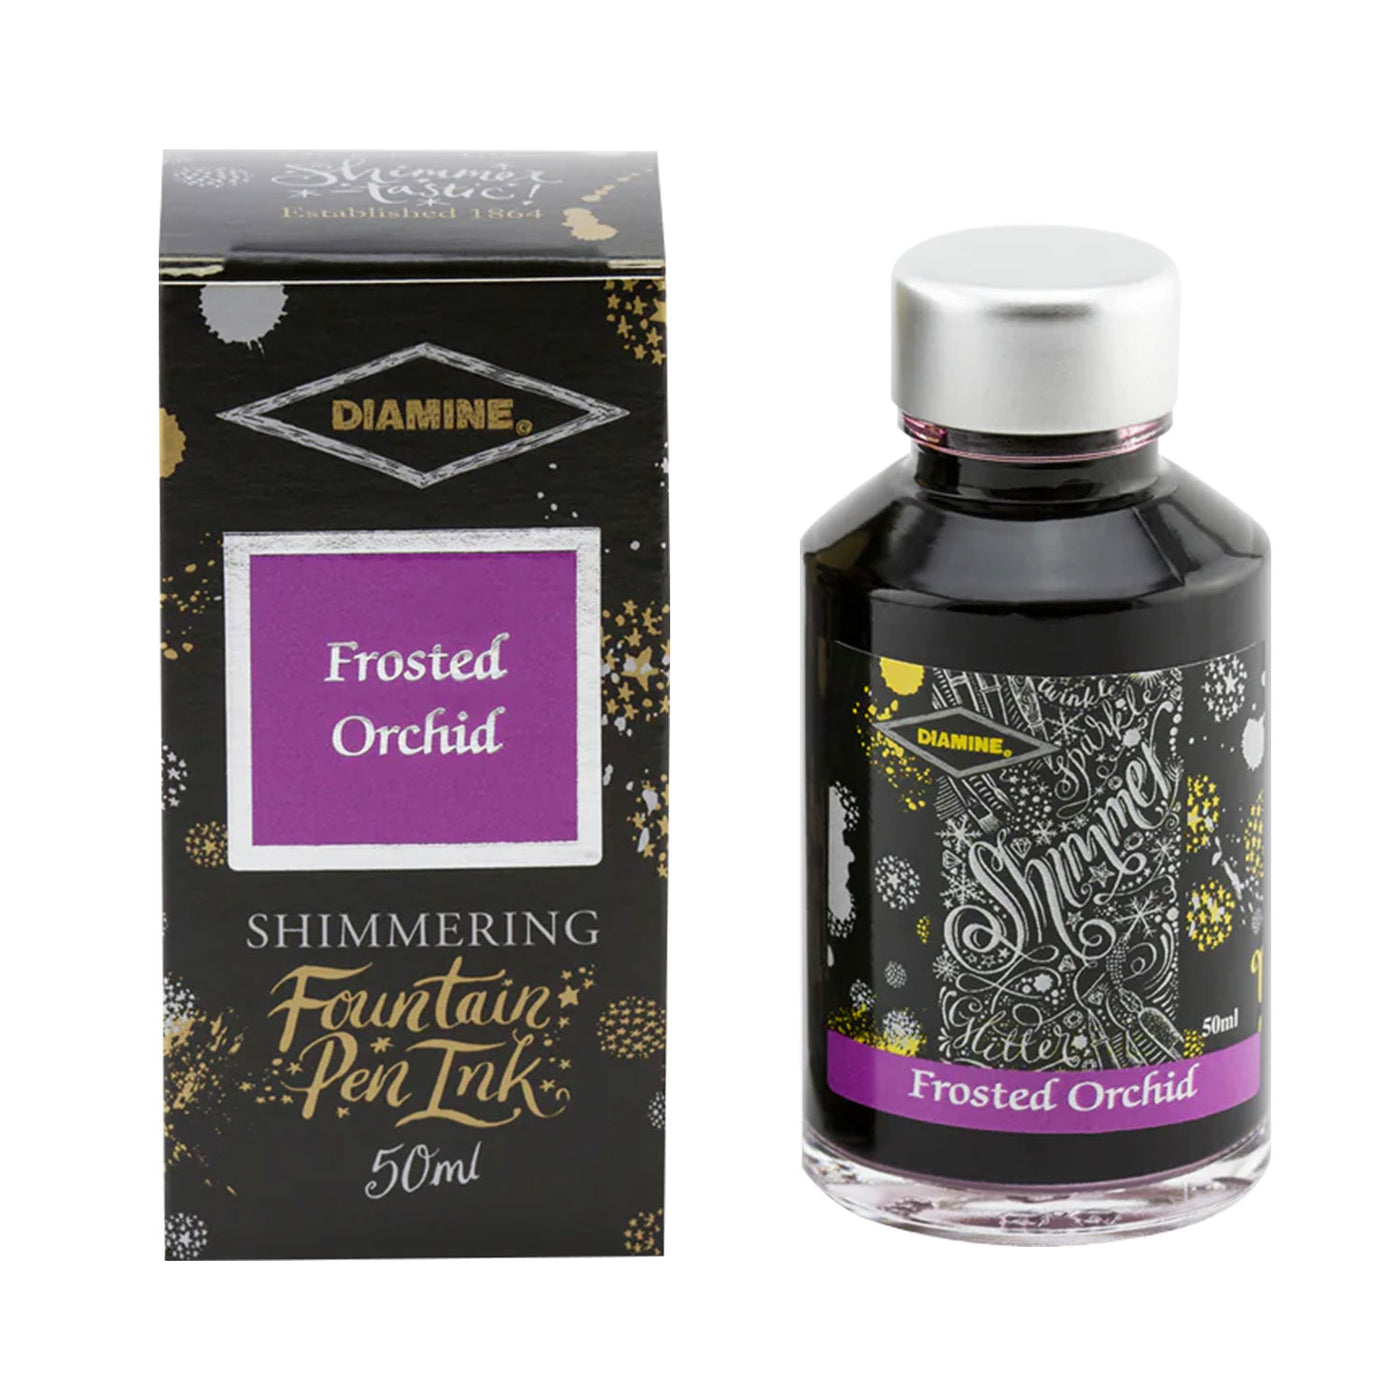 Diamine Shimmer Ink Bottle Frosted Orchid 50ml Image 1